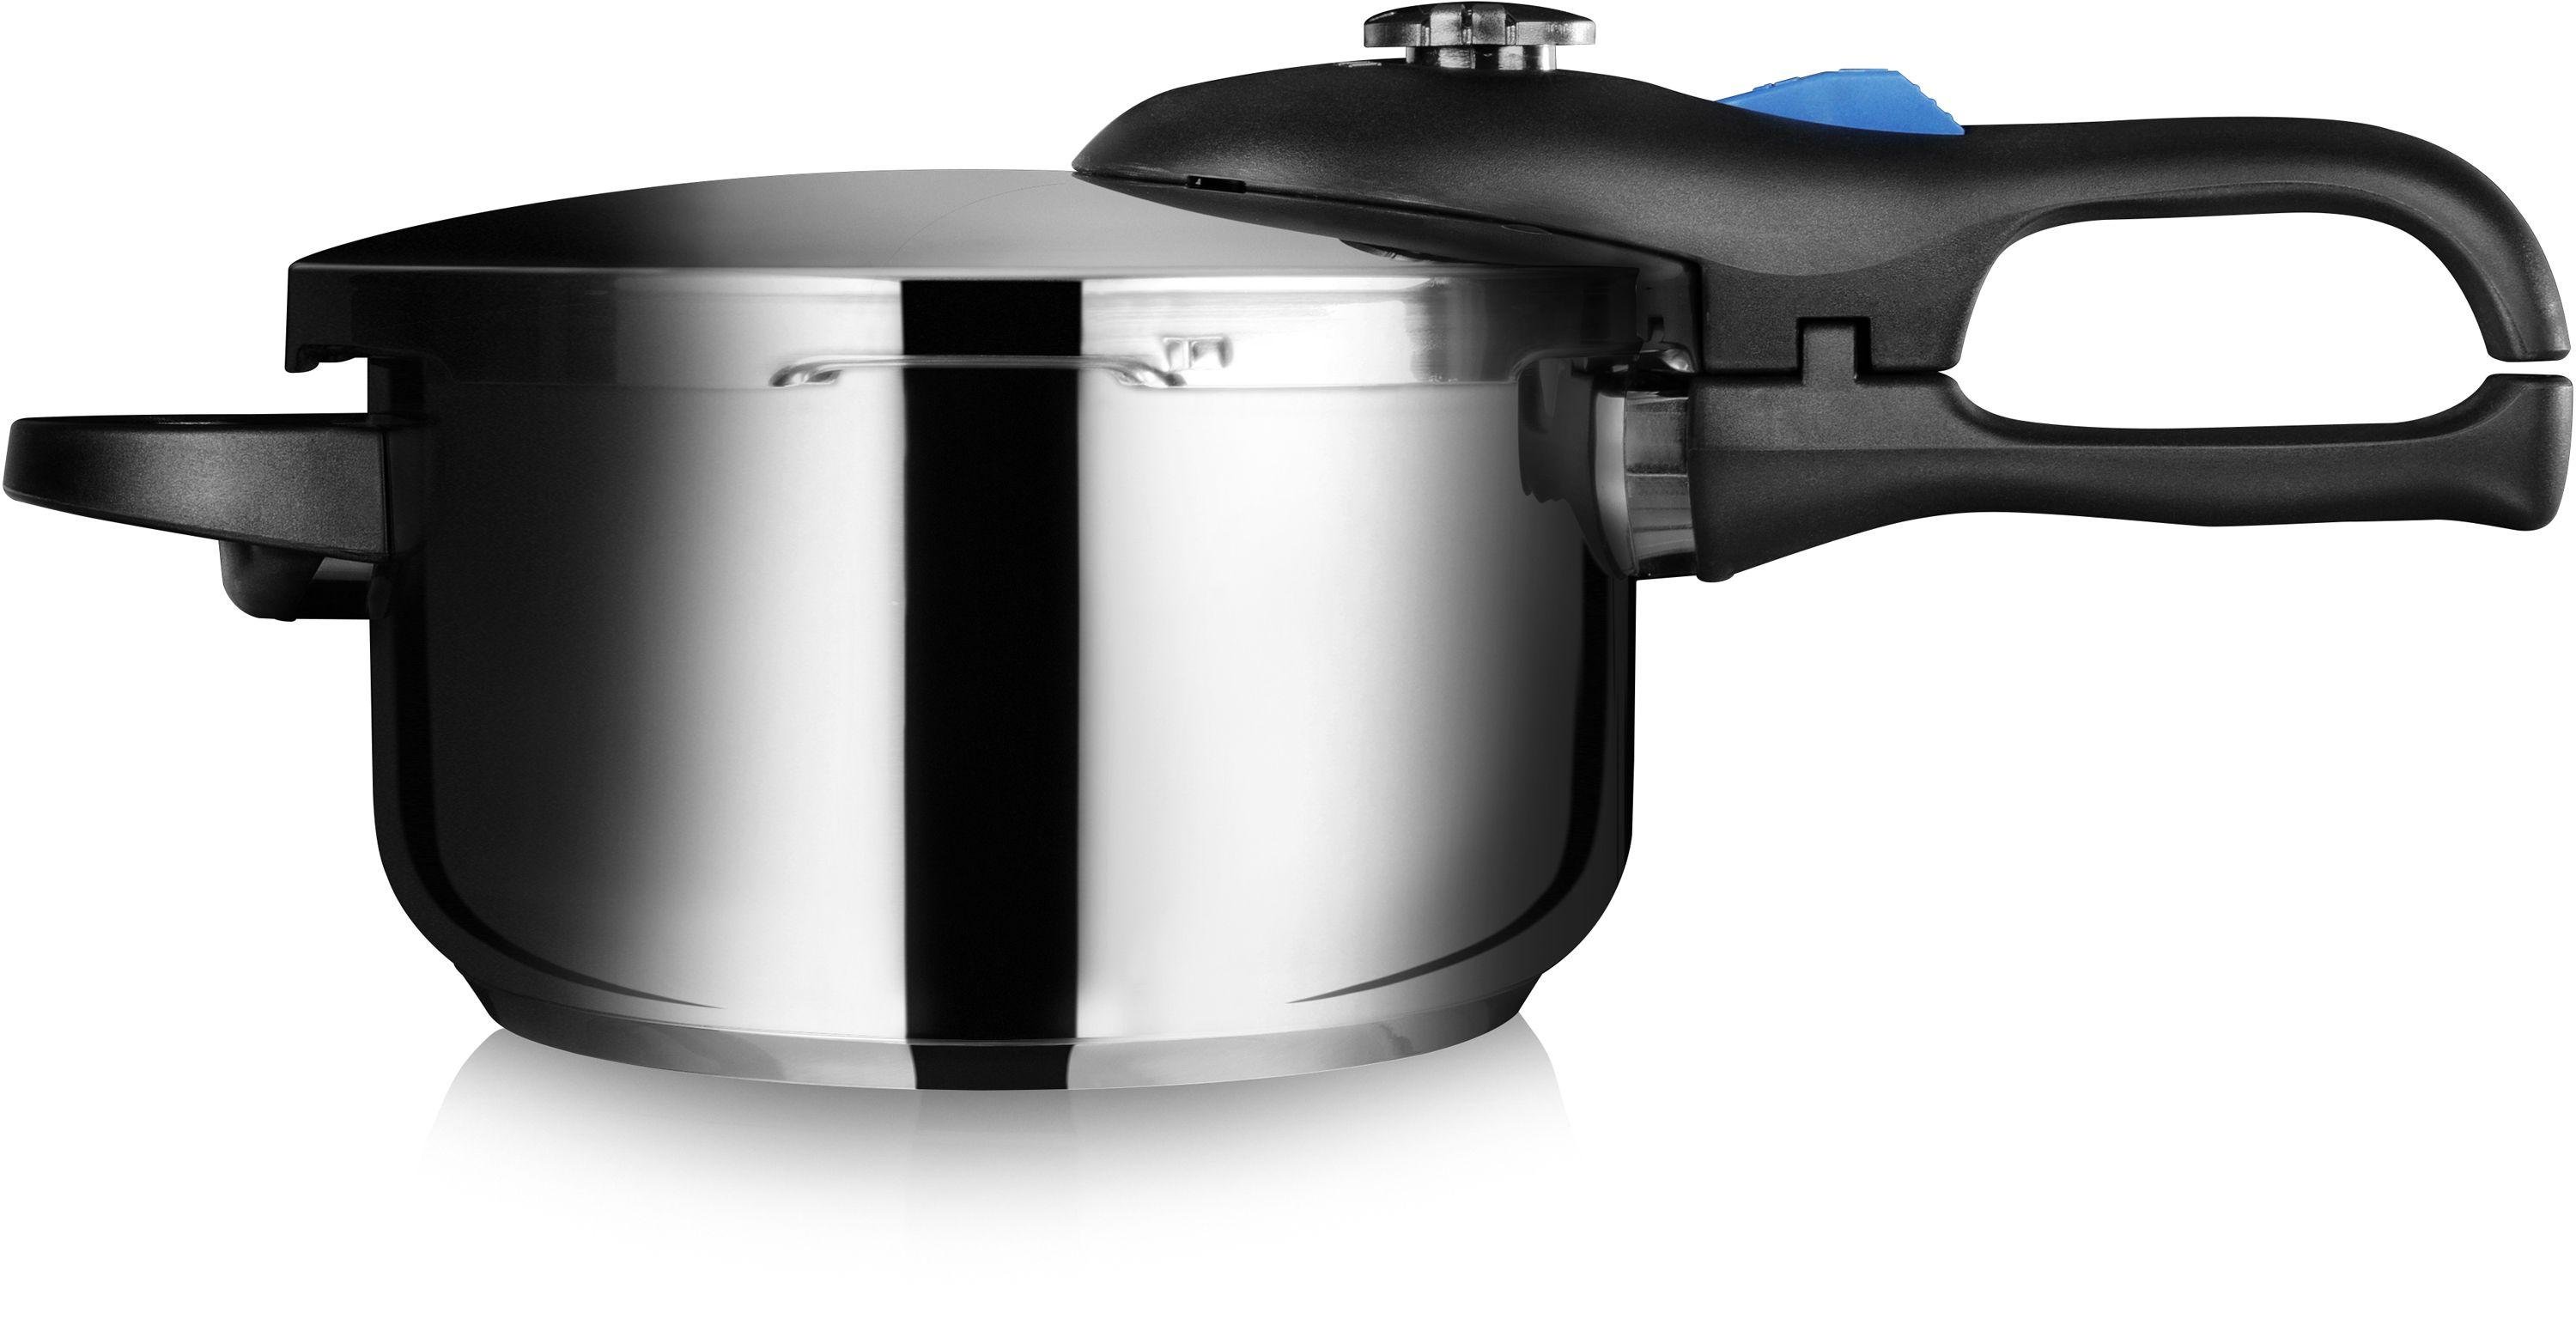 Tower 4.5 Litre Stainless Steel Pressure Cooker